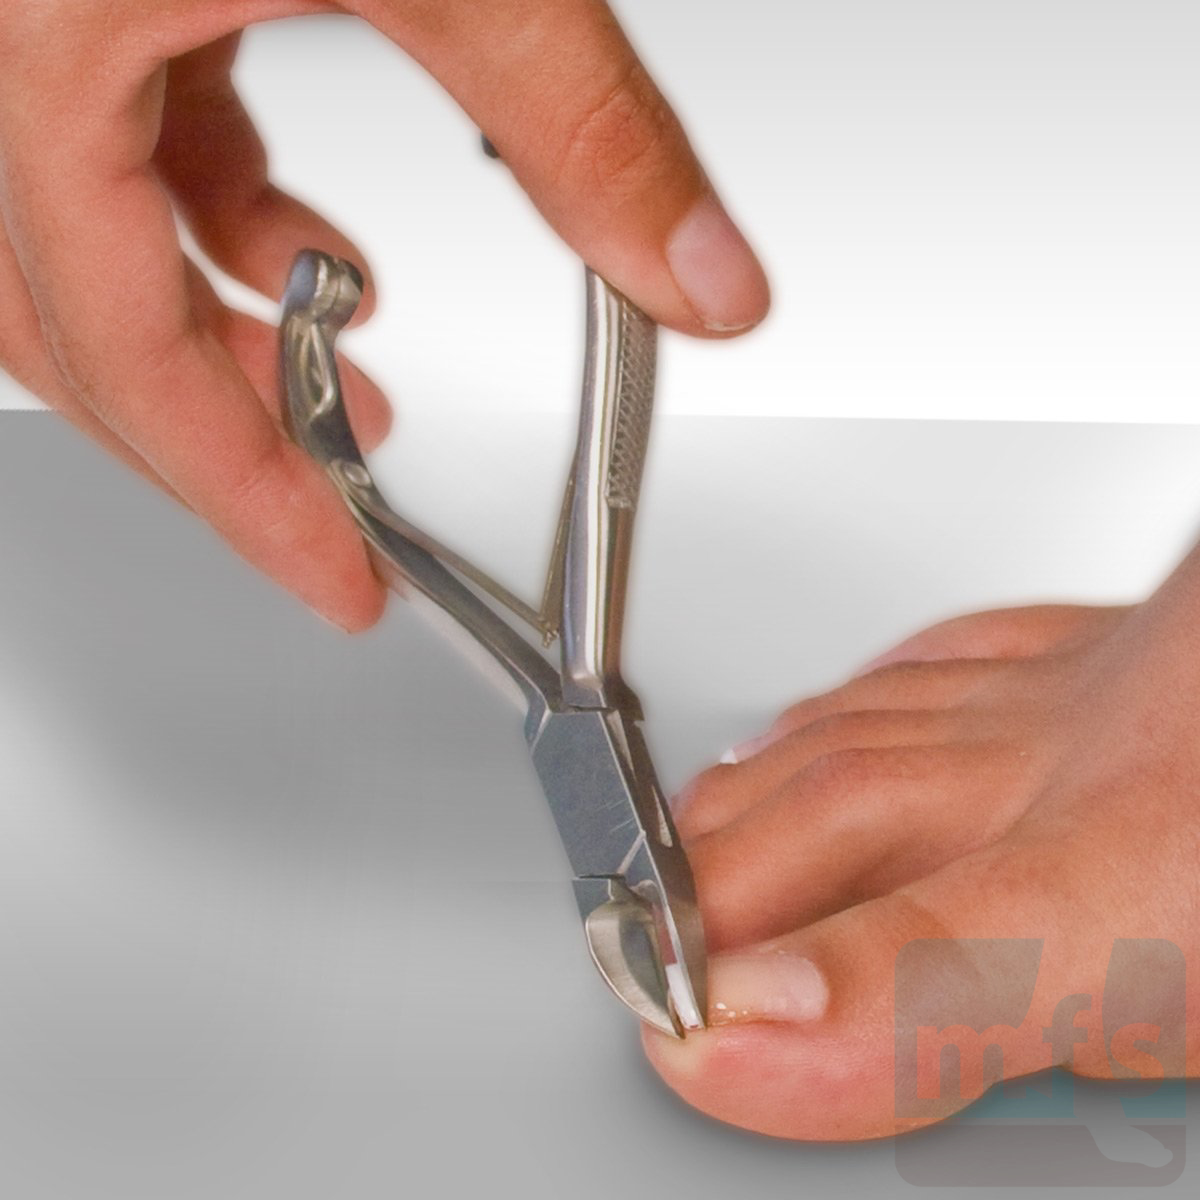 https://www.myfootshop.com/images/thumbs/w_1_0002967_nail-cutter-small.jpeg